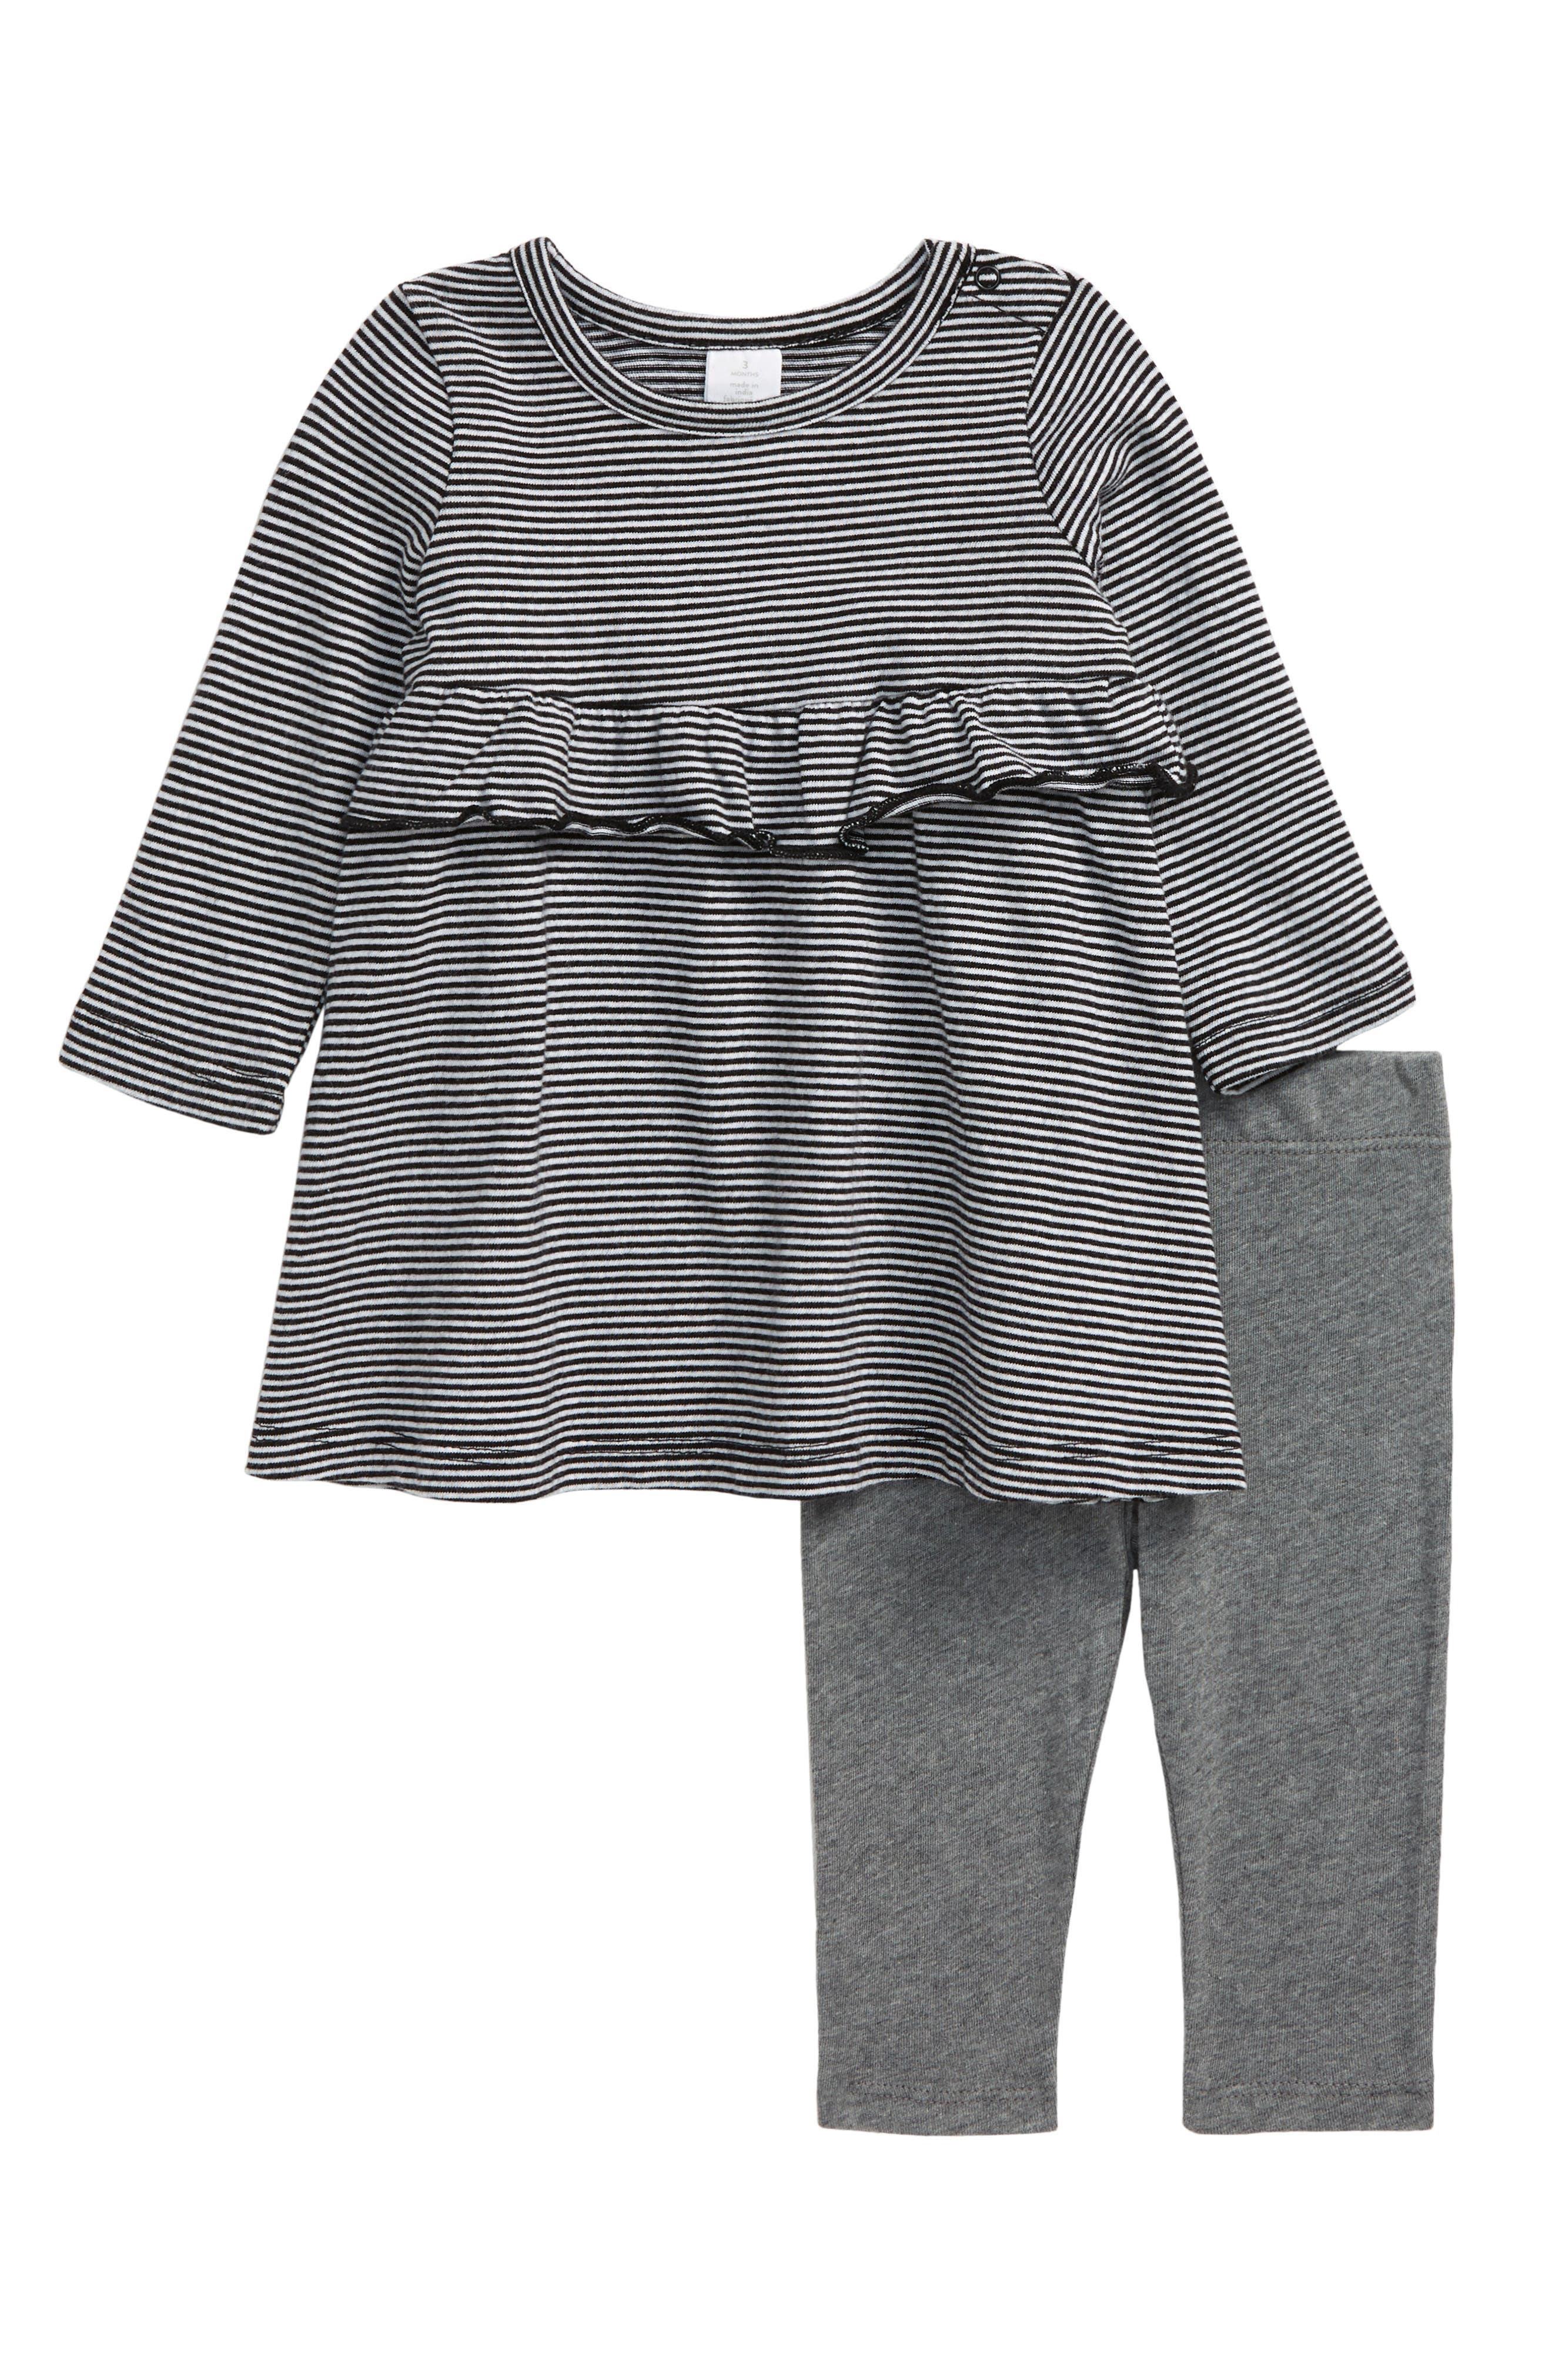 nordstrom baby girl clothes